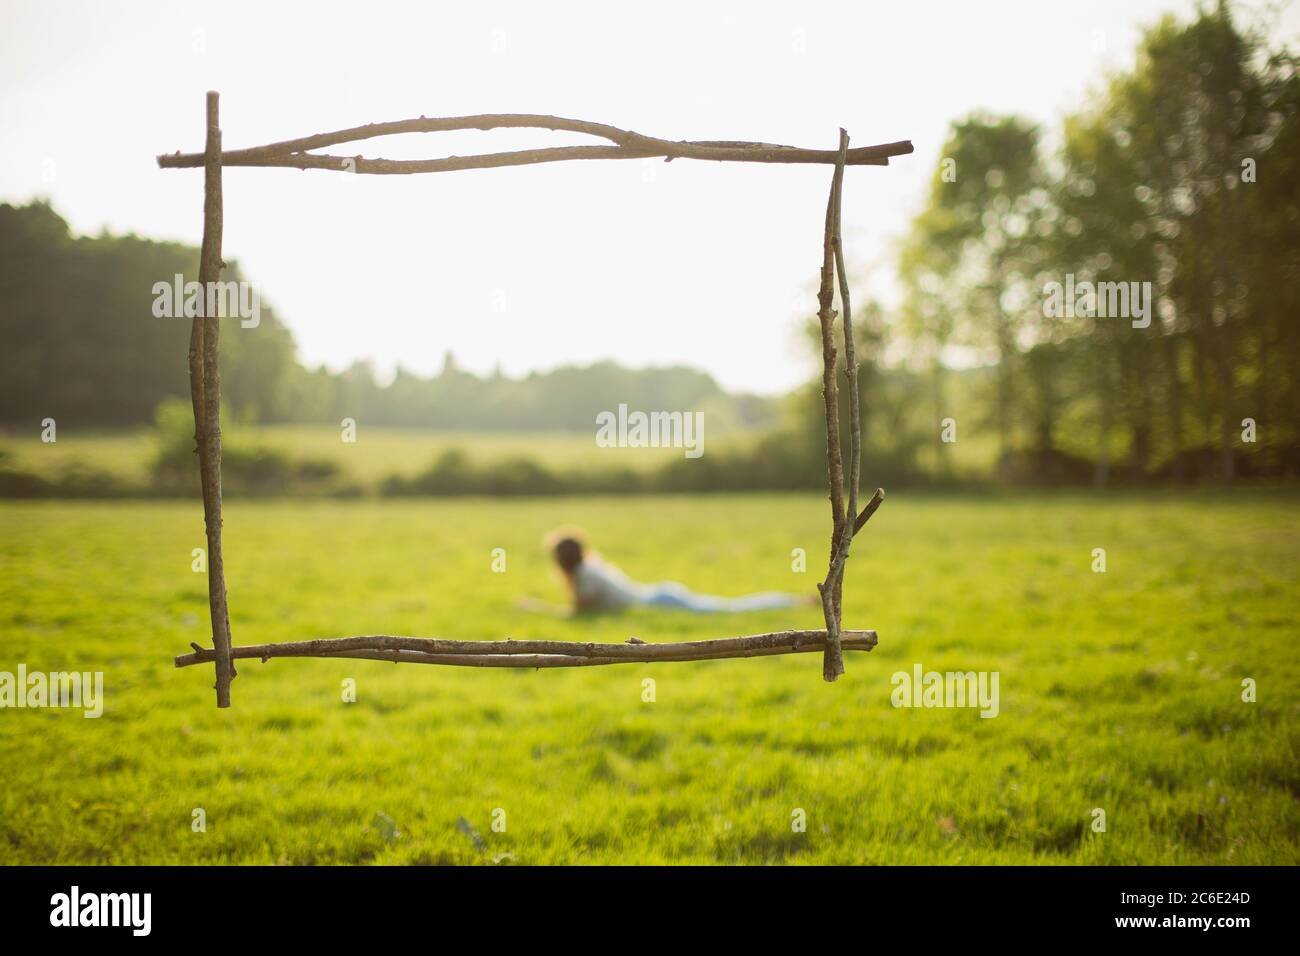 Branch frame over young woman laying in sunny grass field Stock Photo